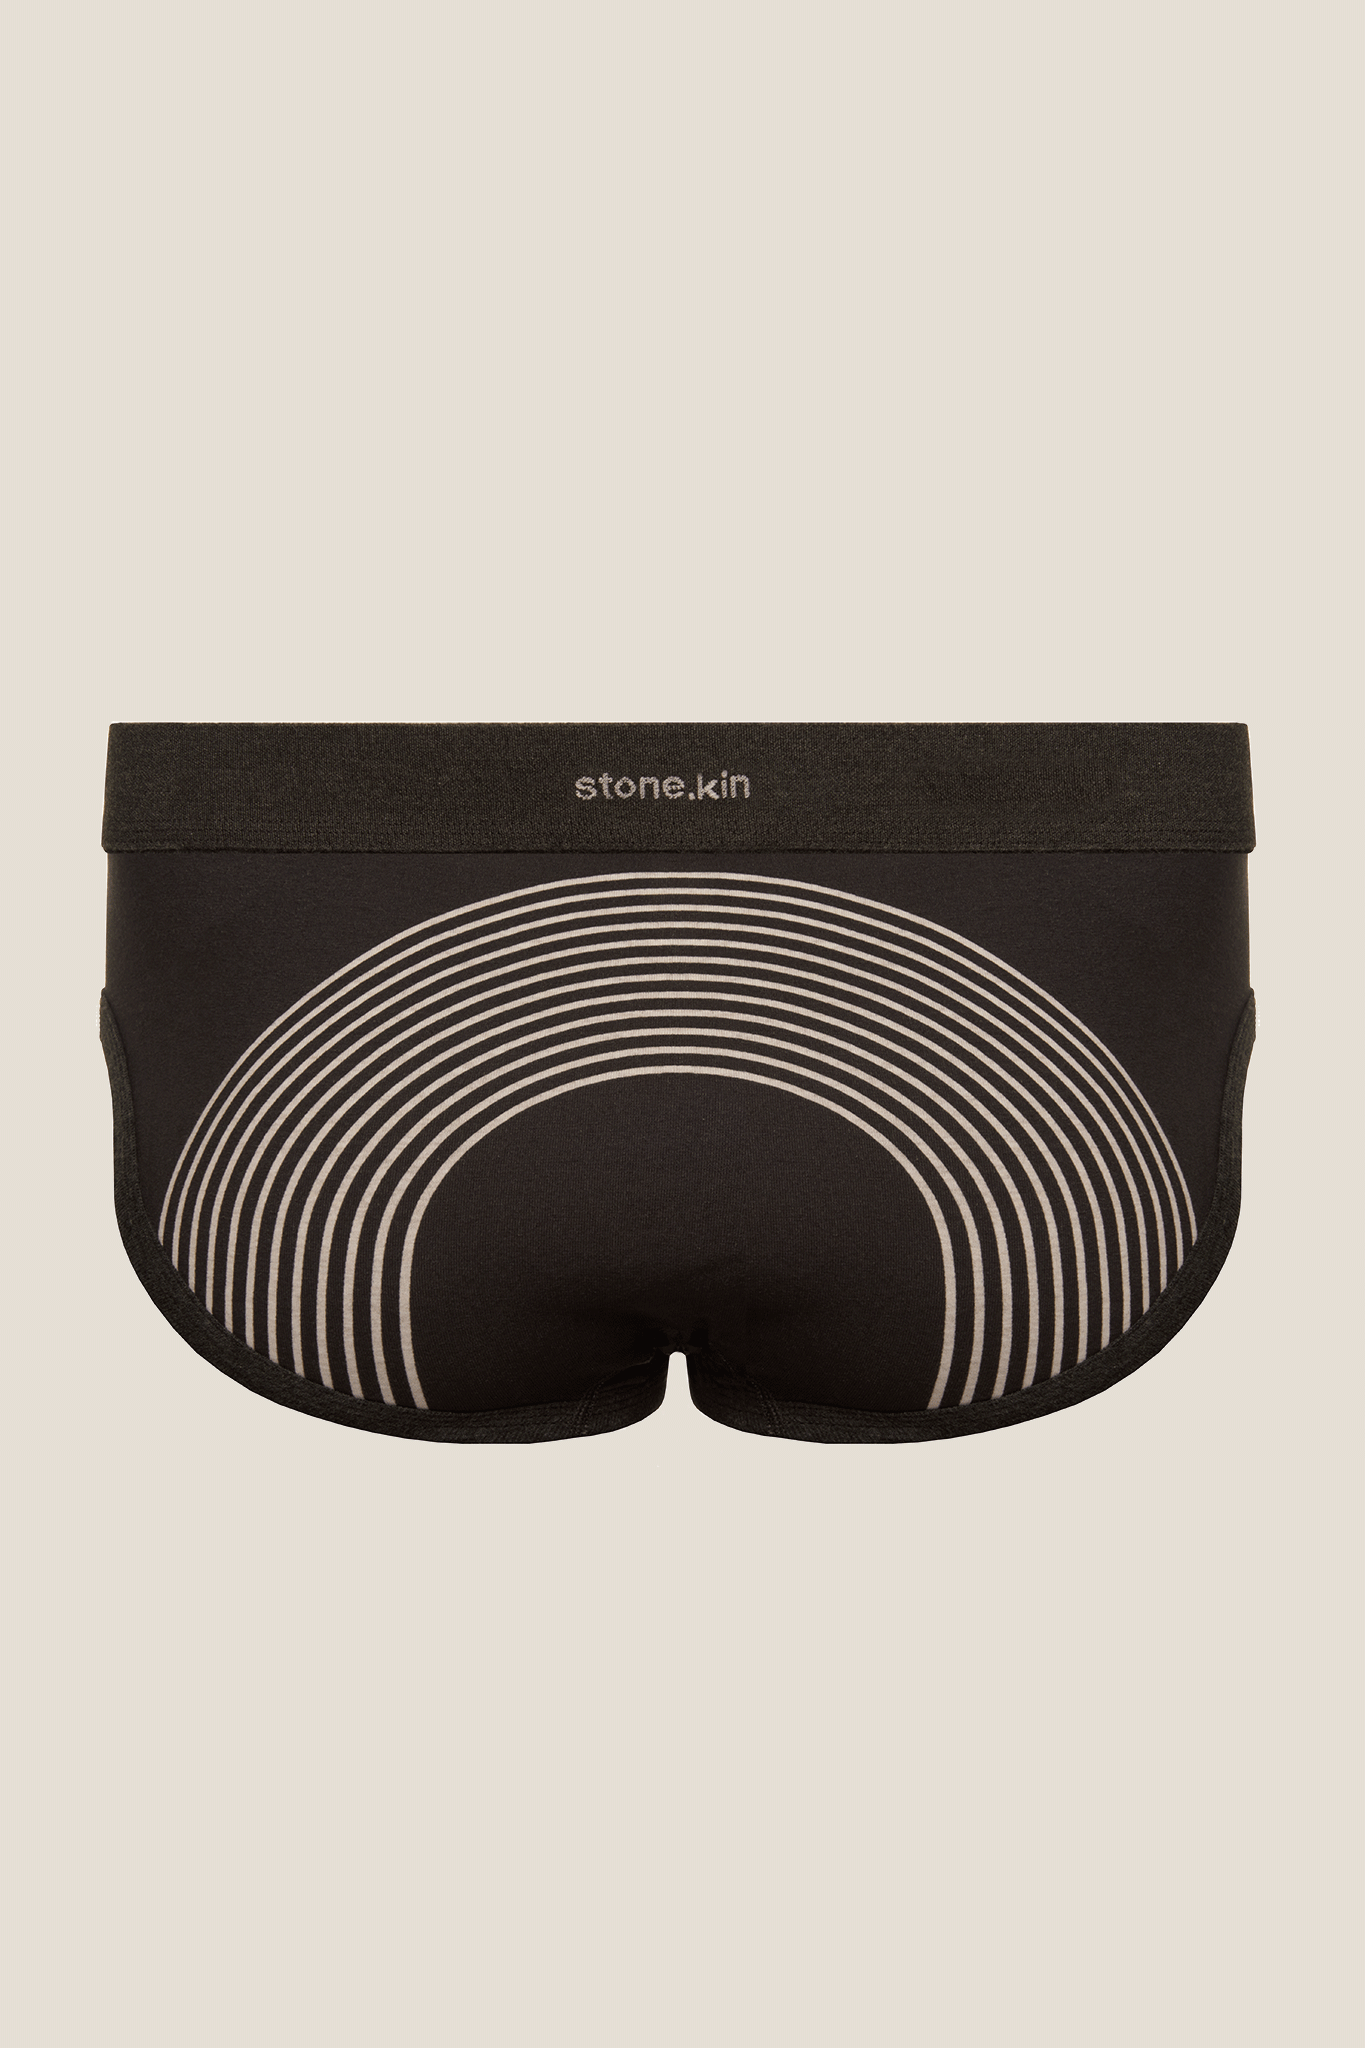 Stone.kin - Brief in Organic Cotton - Tar with Lines